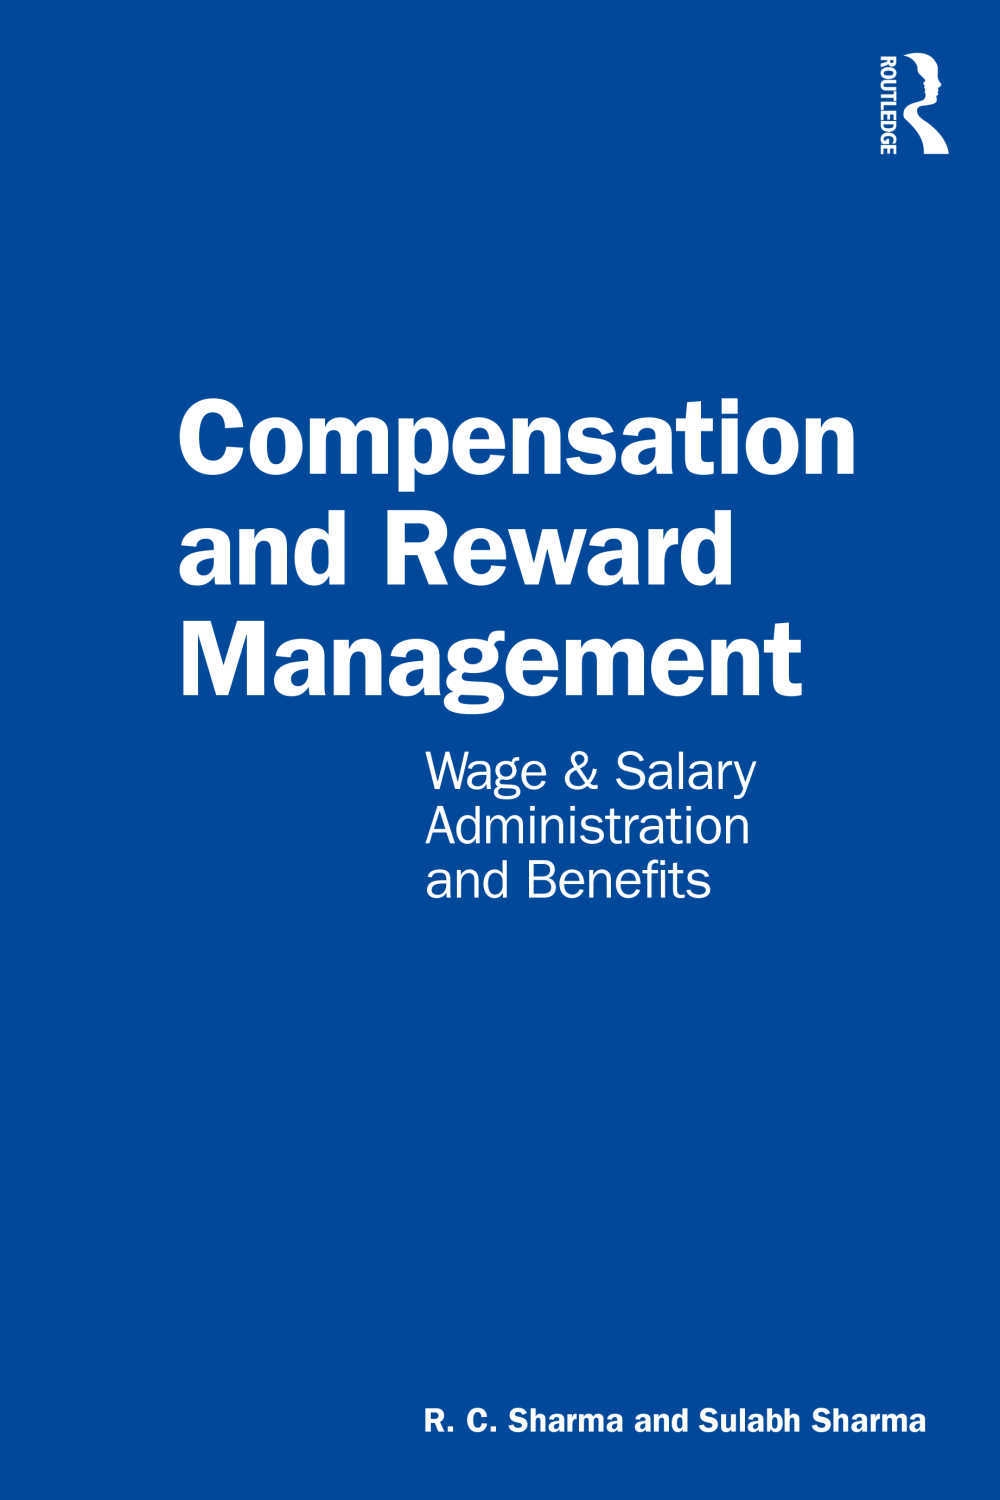 Compensation and Reward Management: Wage & Salary Administration and Benefits